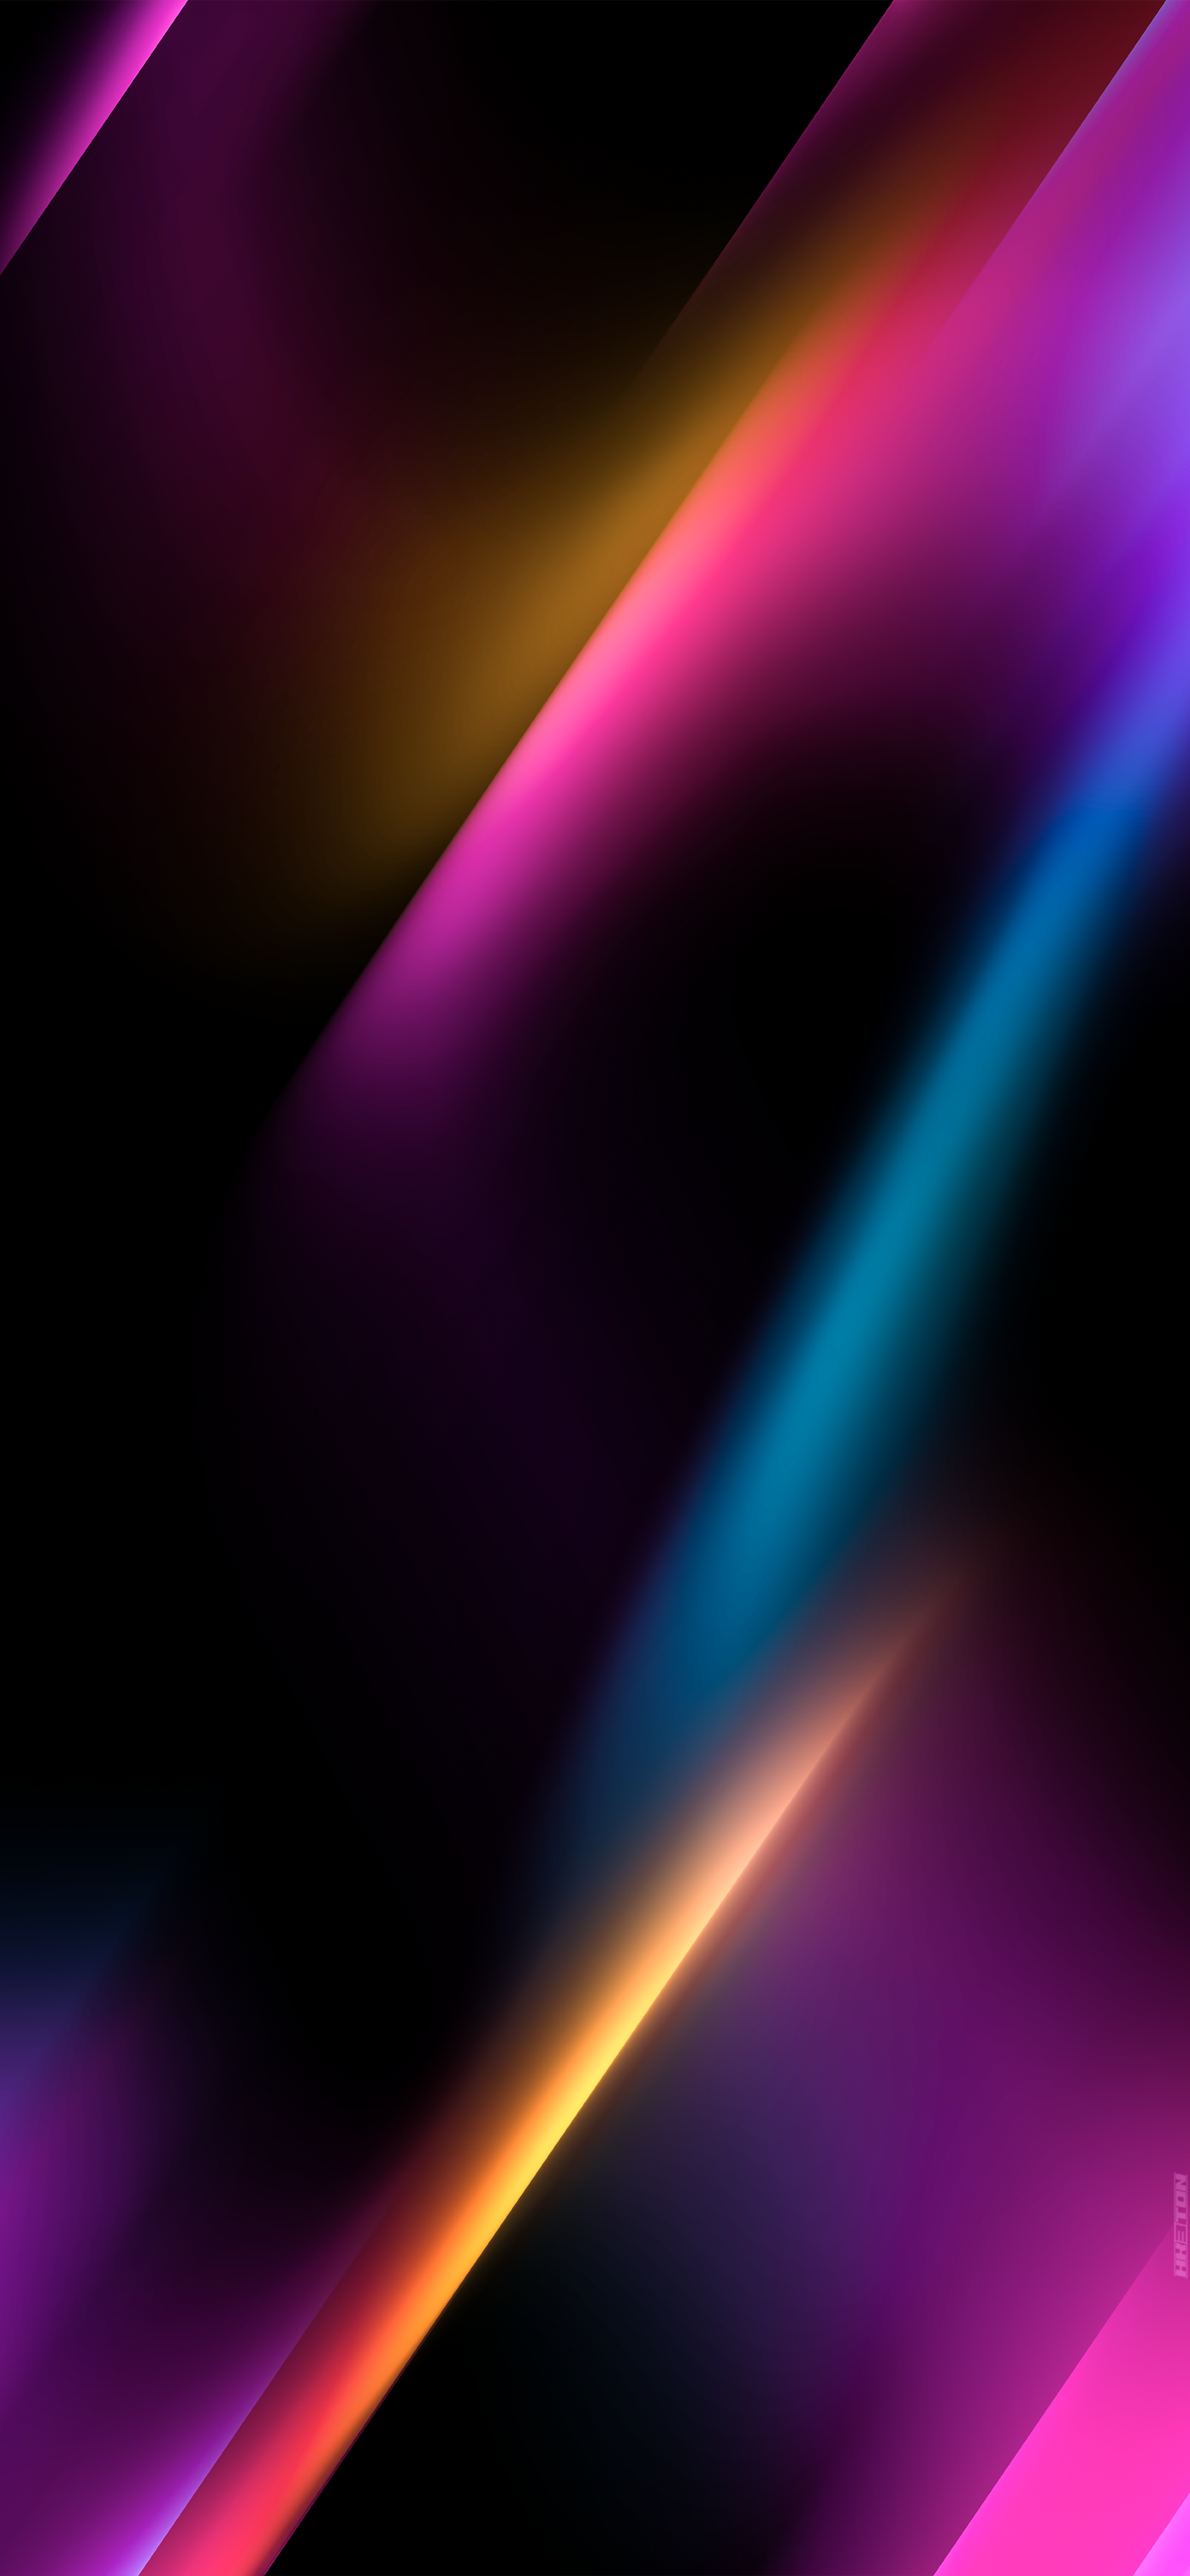 Gradient created for Zollotech  Flash wallpaper Apple wallpaper iphone  Smartphone wallpaper